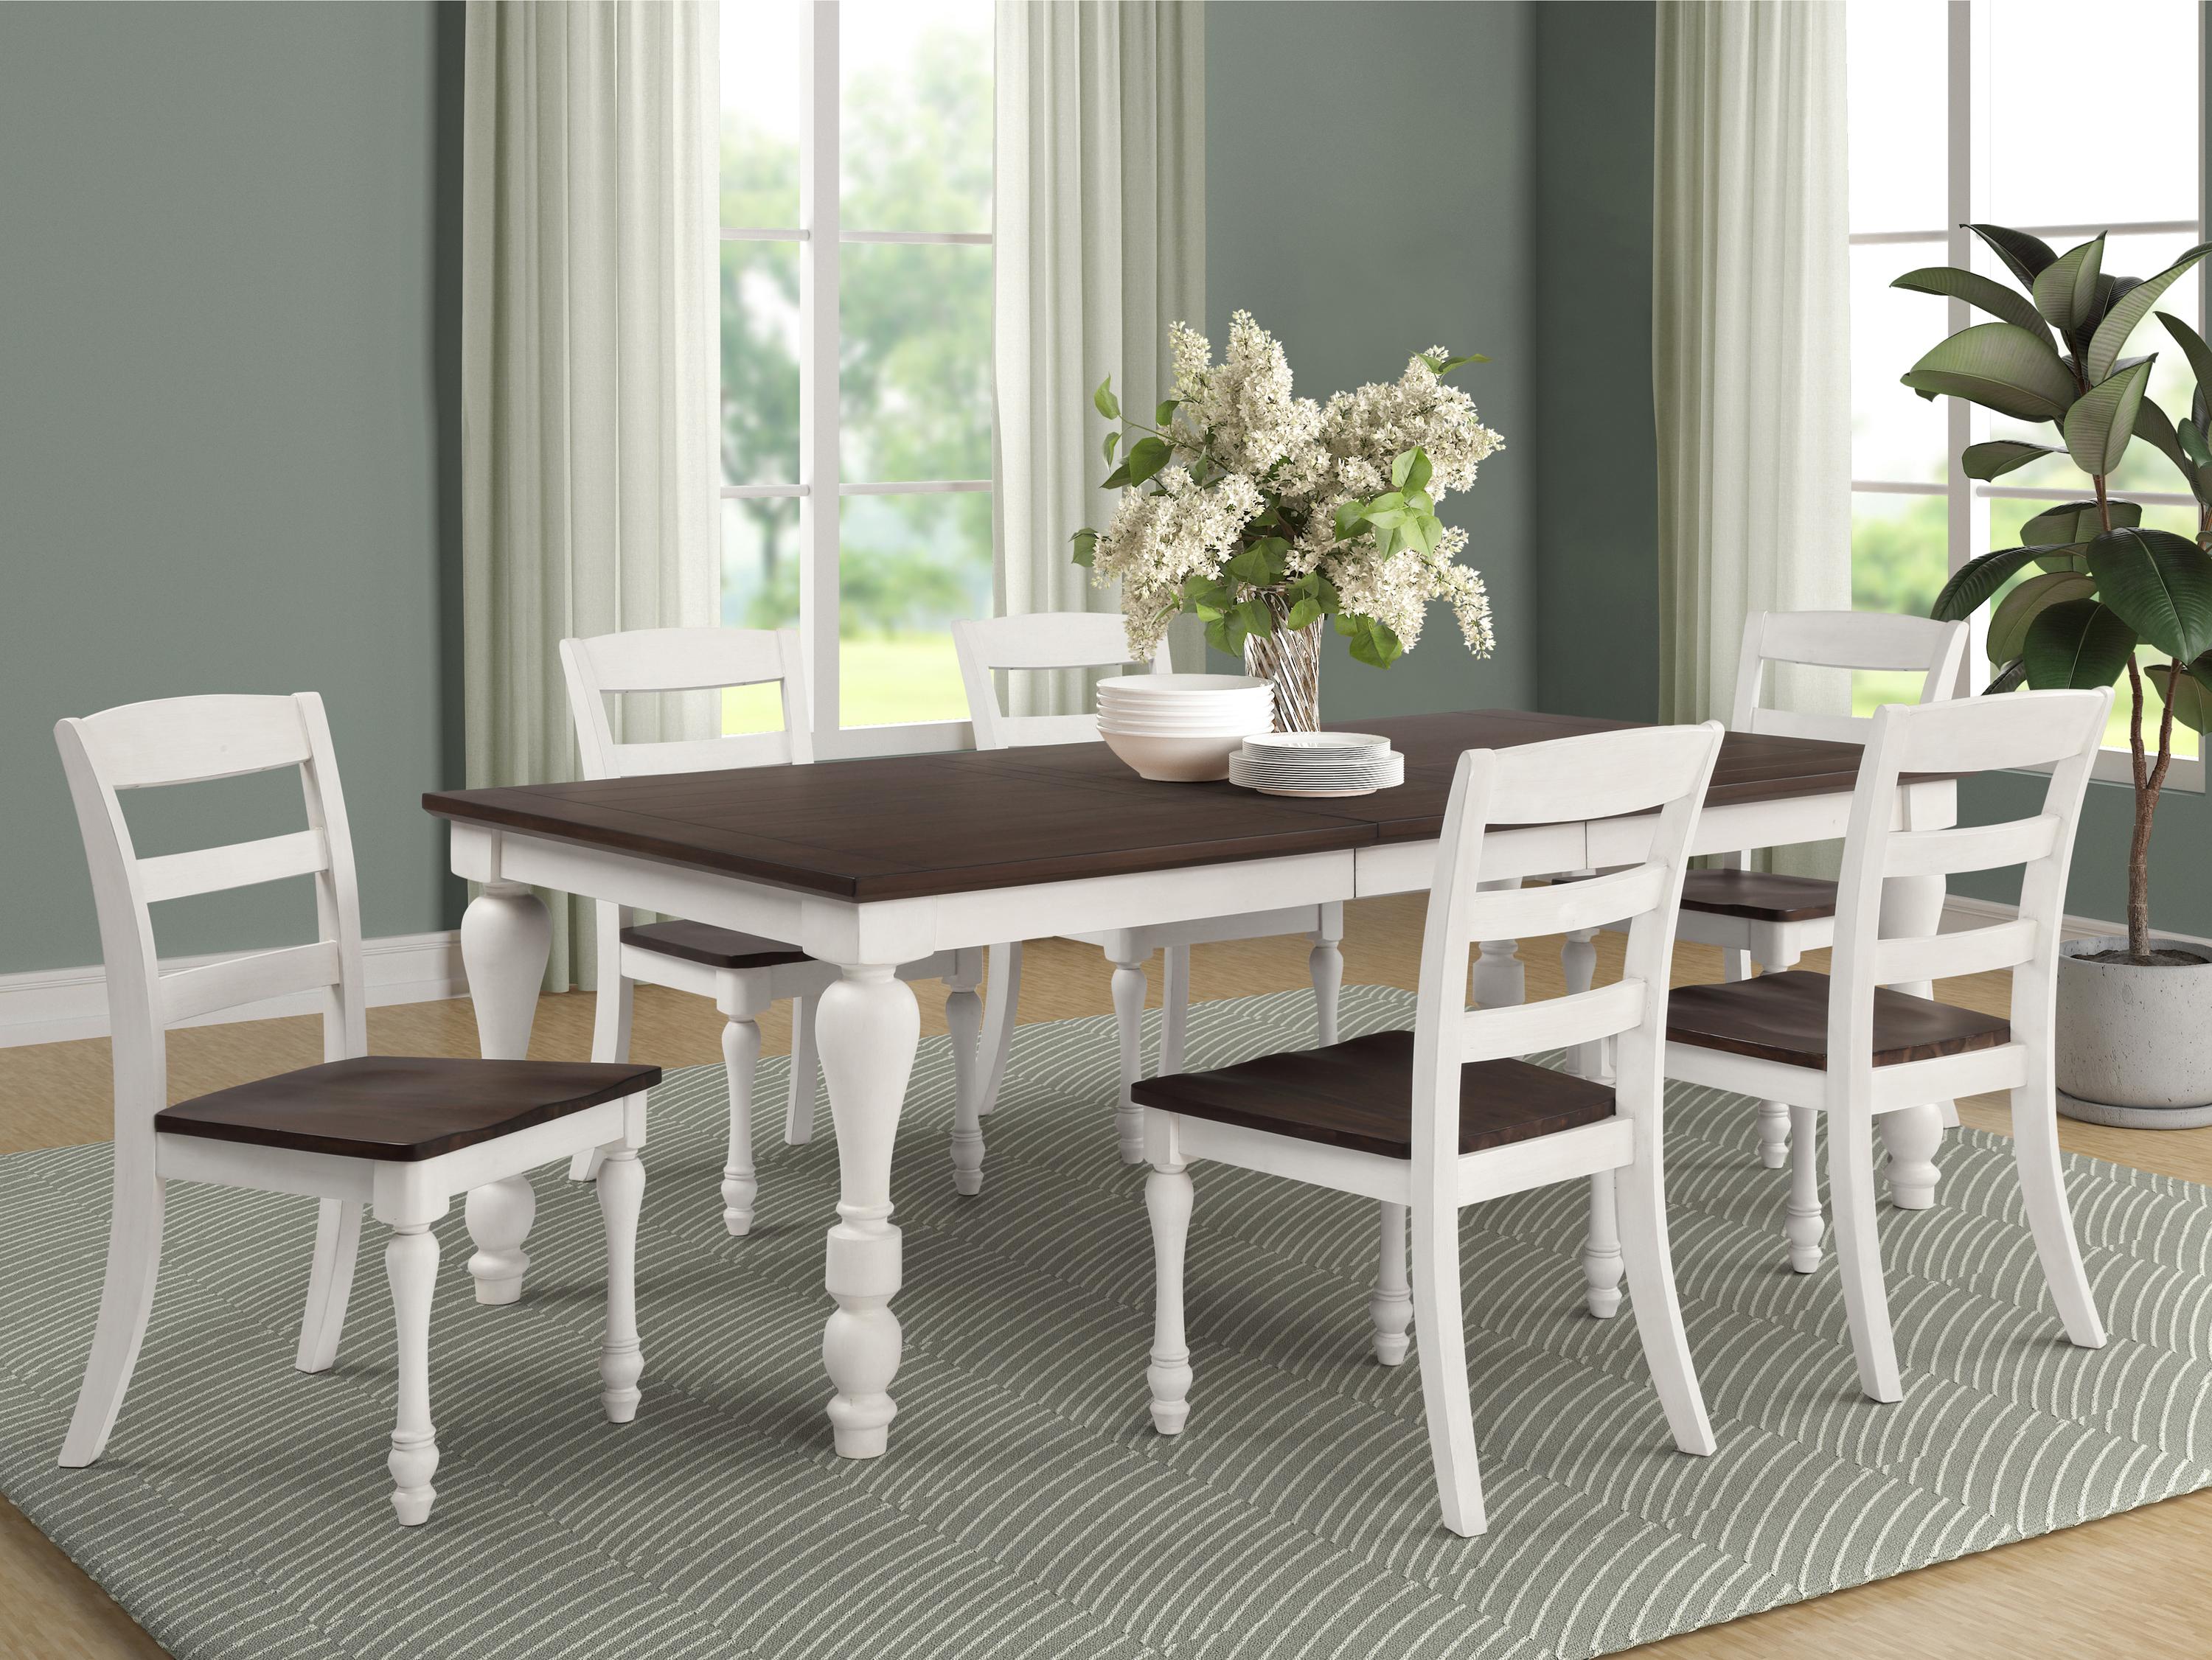 Cottage Dining Room Set 110381-S5 Madelyn 110381-S5 in Cocoa, White 